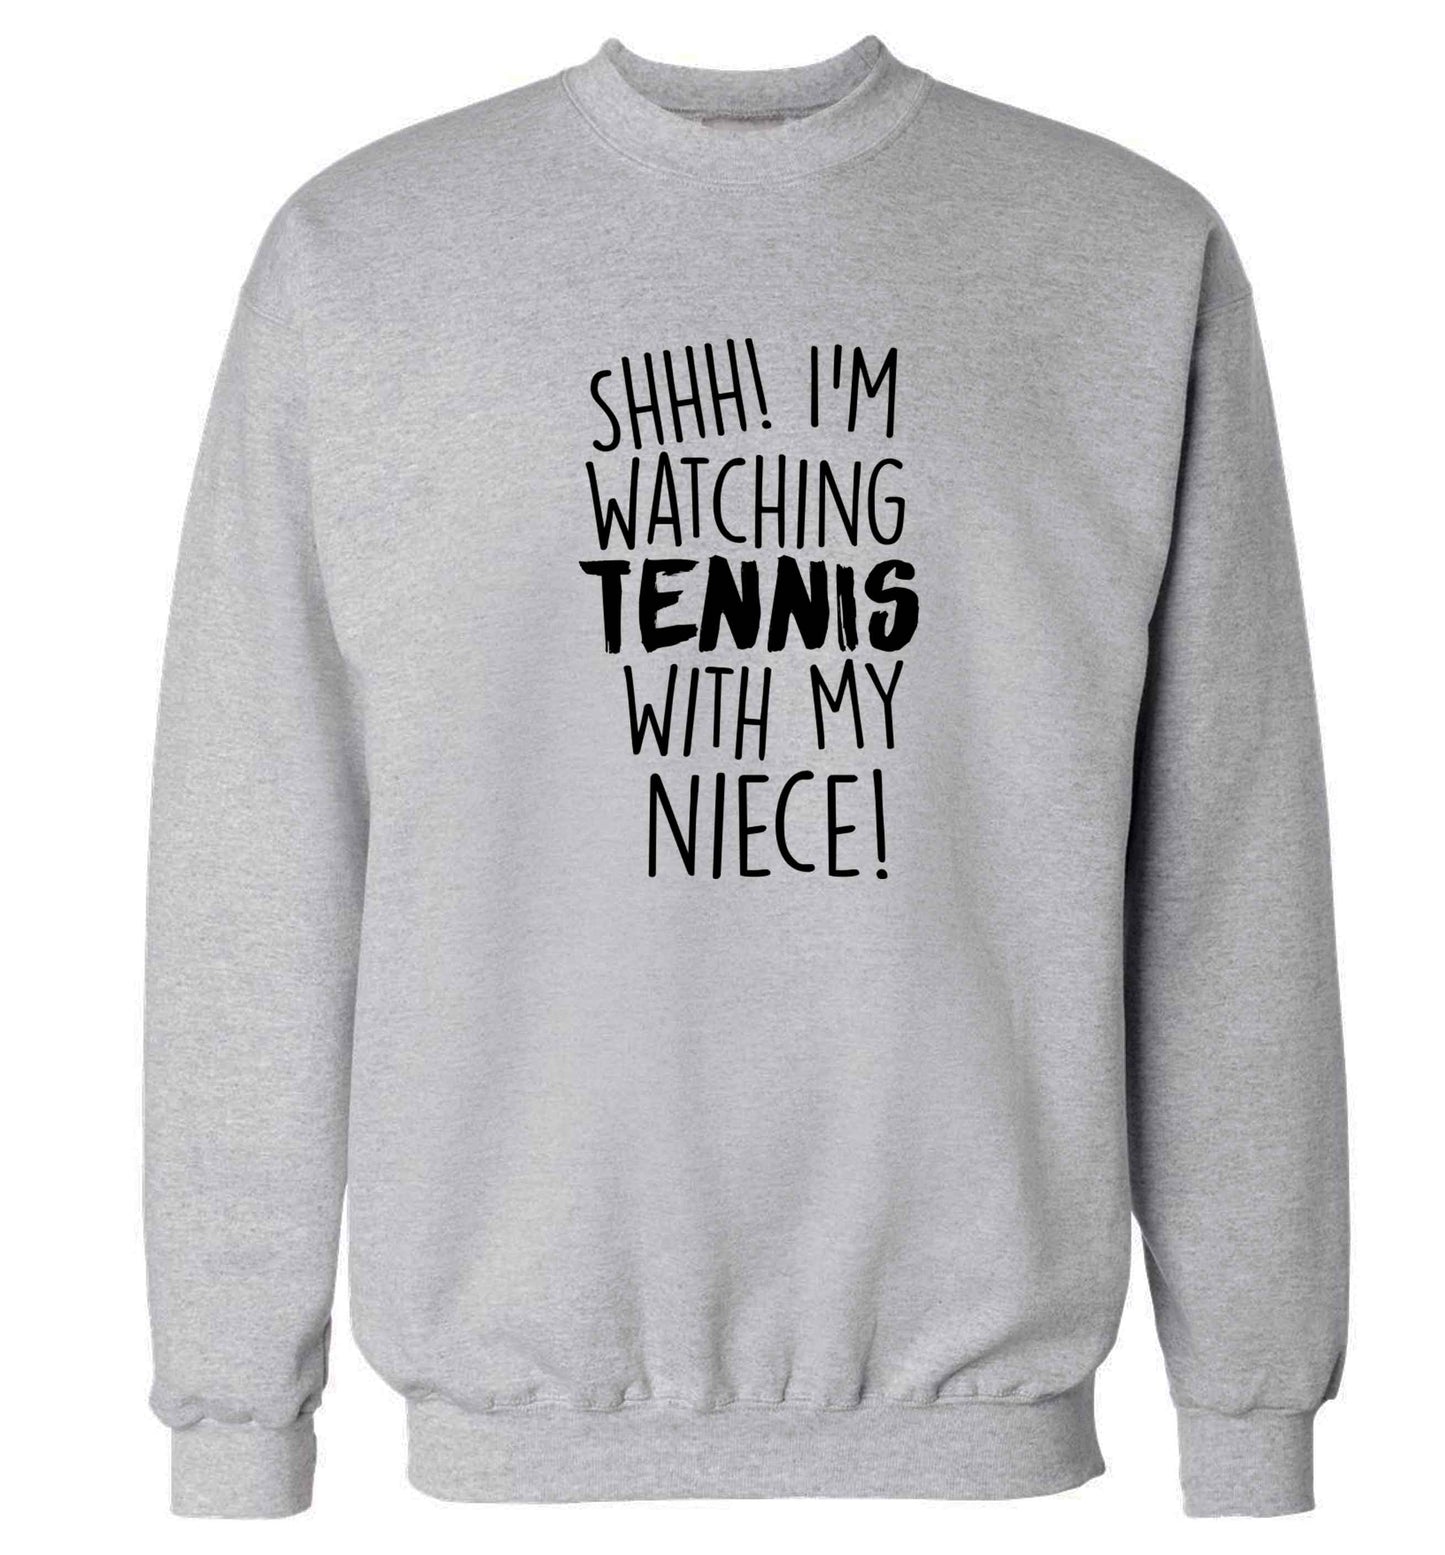 Shh! I'm watching tennis with my niece! Adult's unisex grey Sweater 2XL